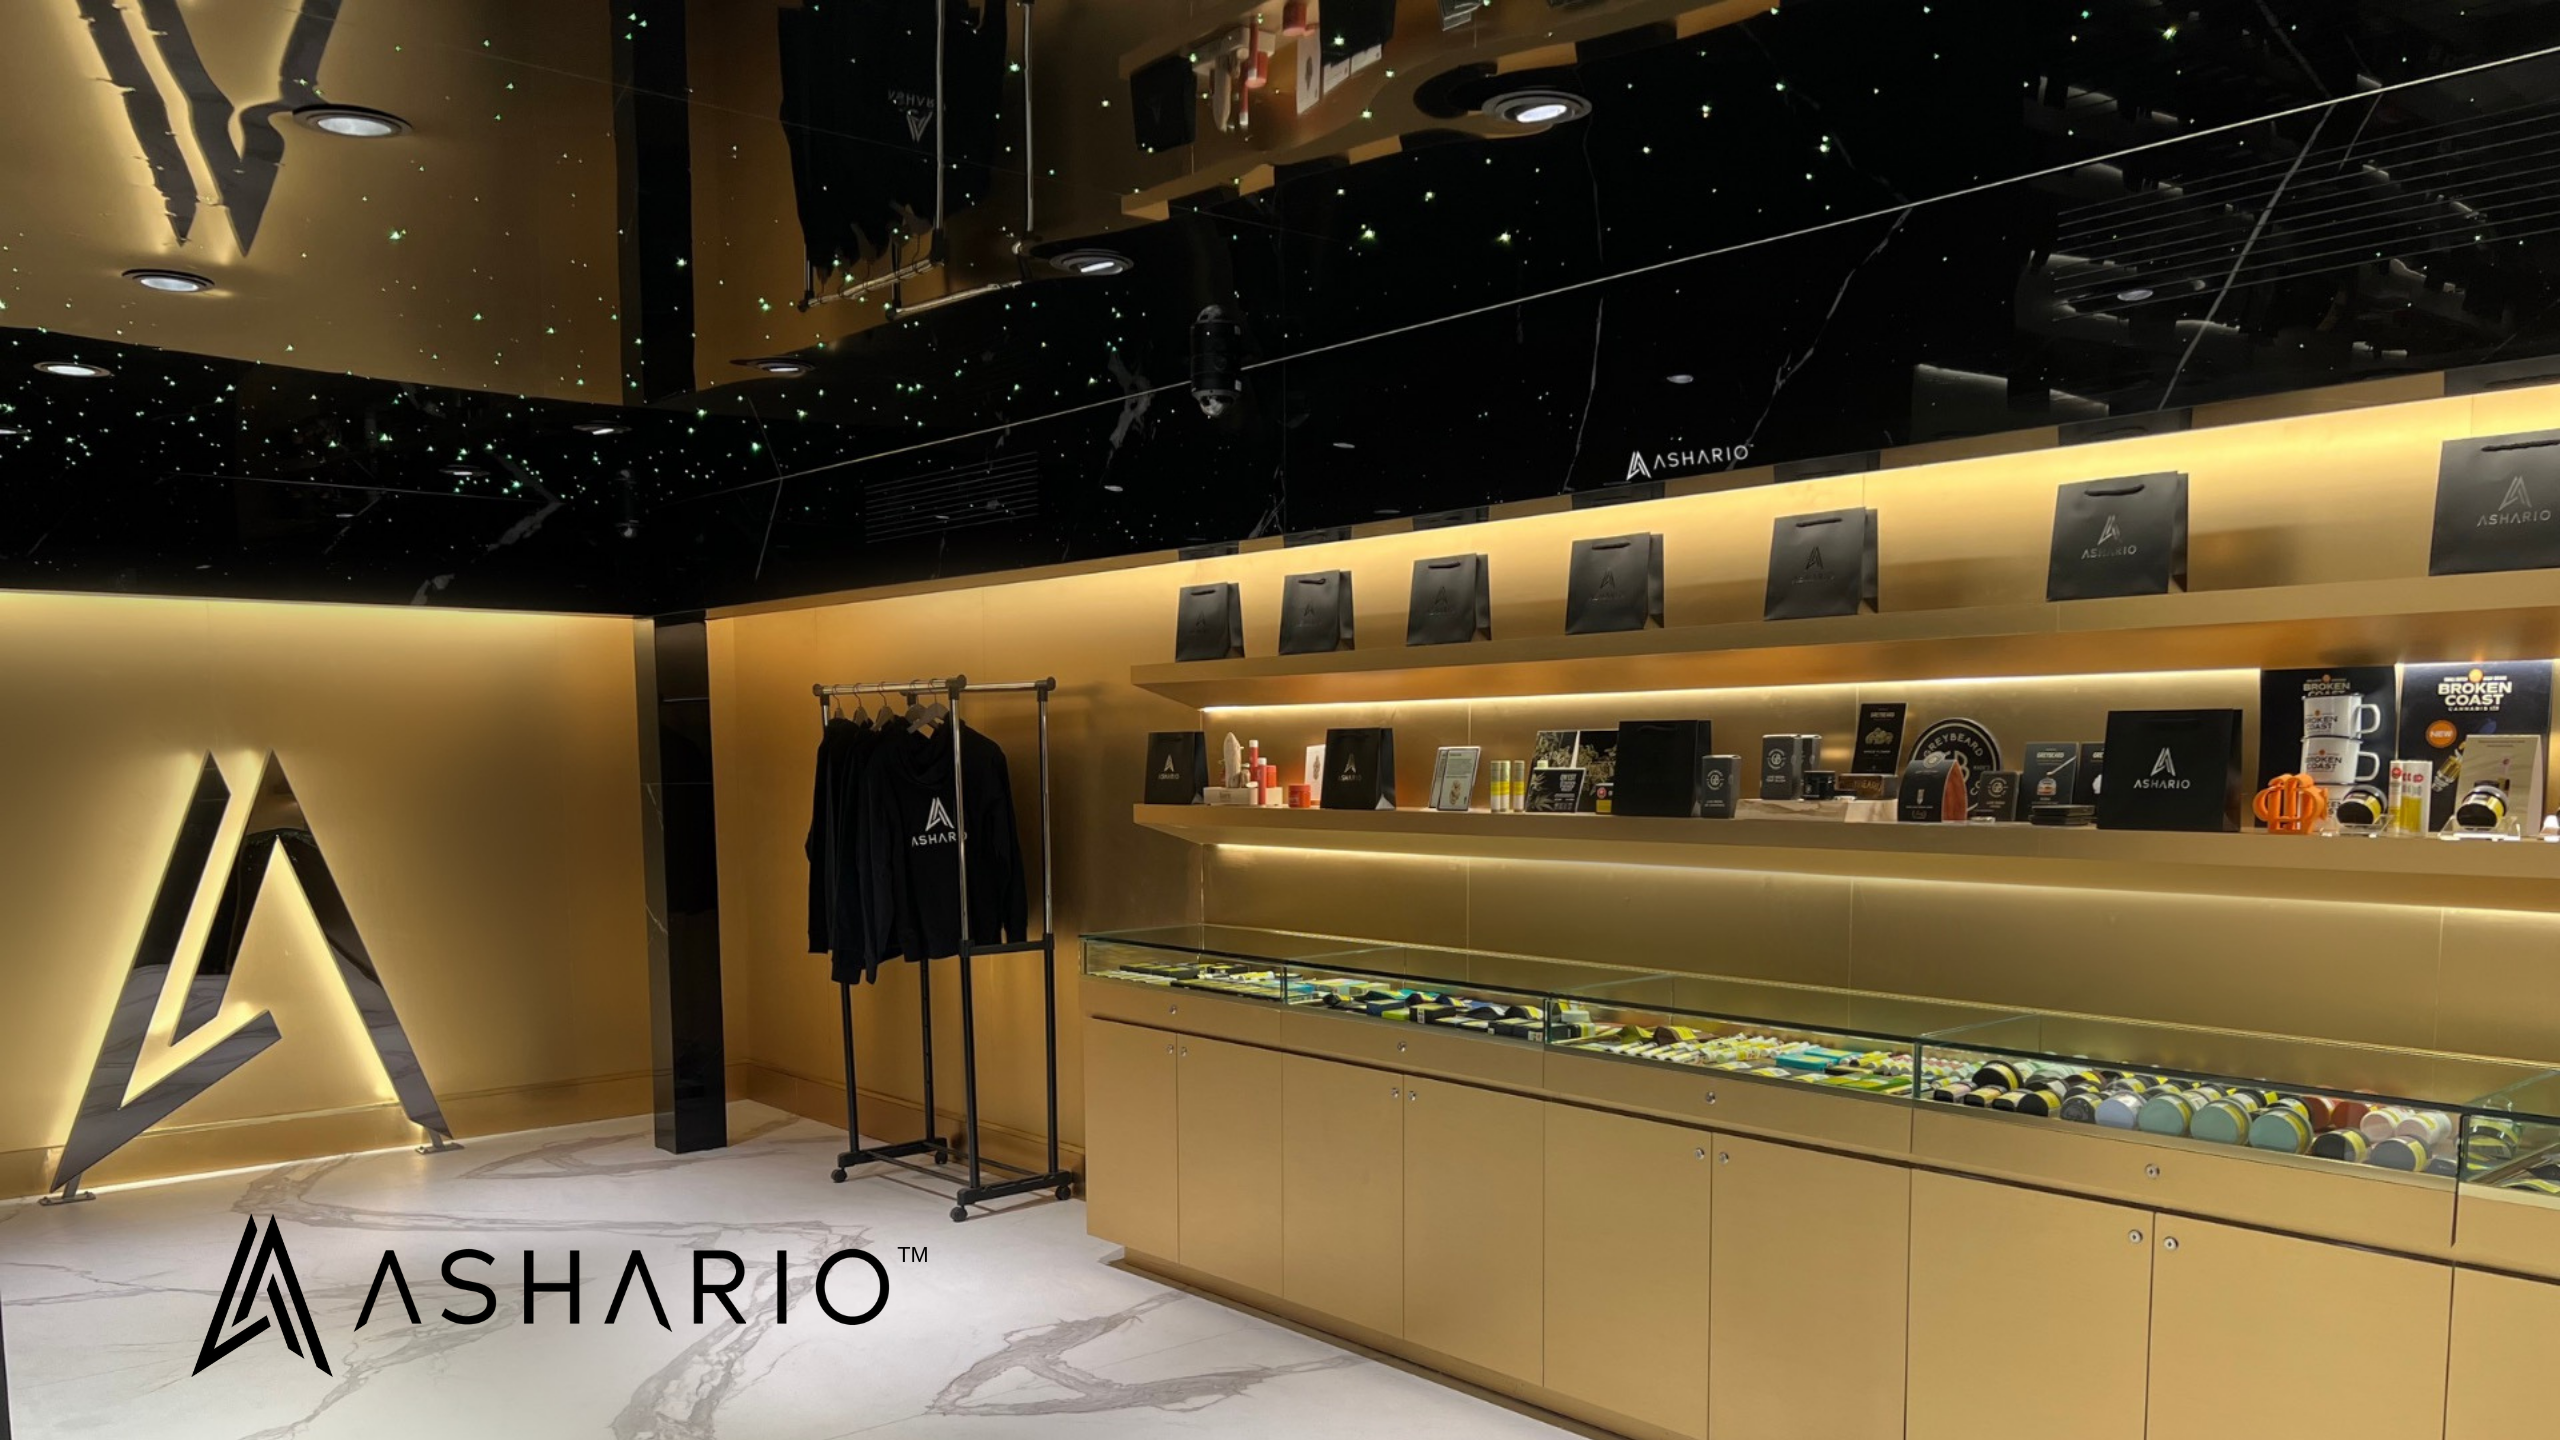 Looking for affordable cannabis stores in North York? Look no further than Ashario Cannabis. Our dispensary offers a wide selection of high-quality cannabis products at prices that won't break the bank.